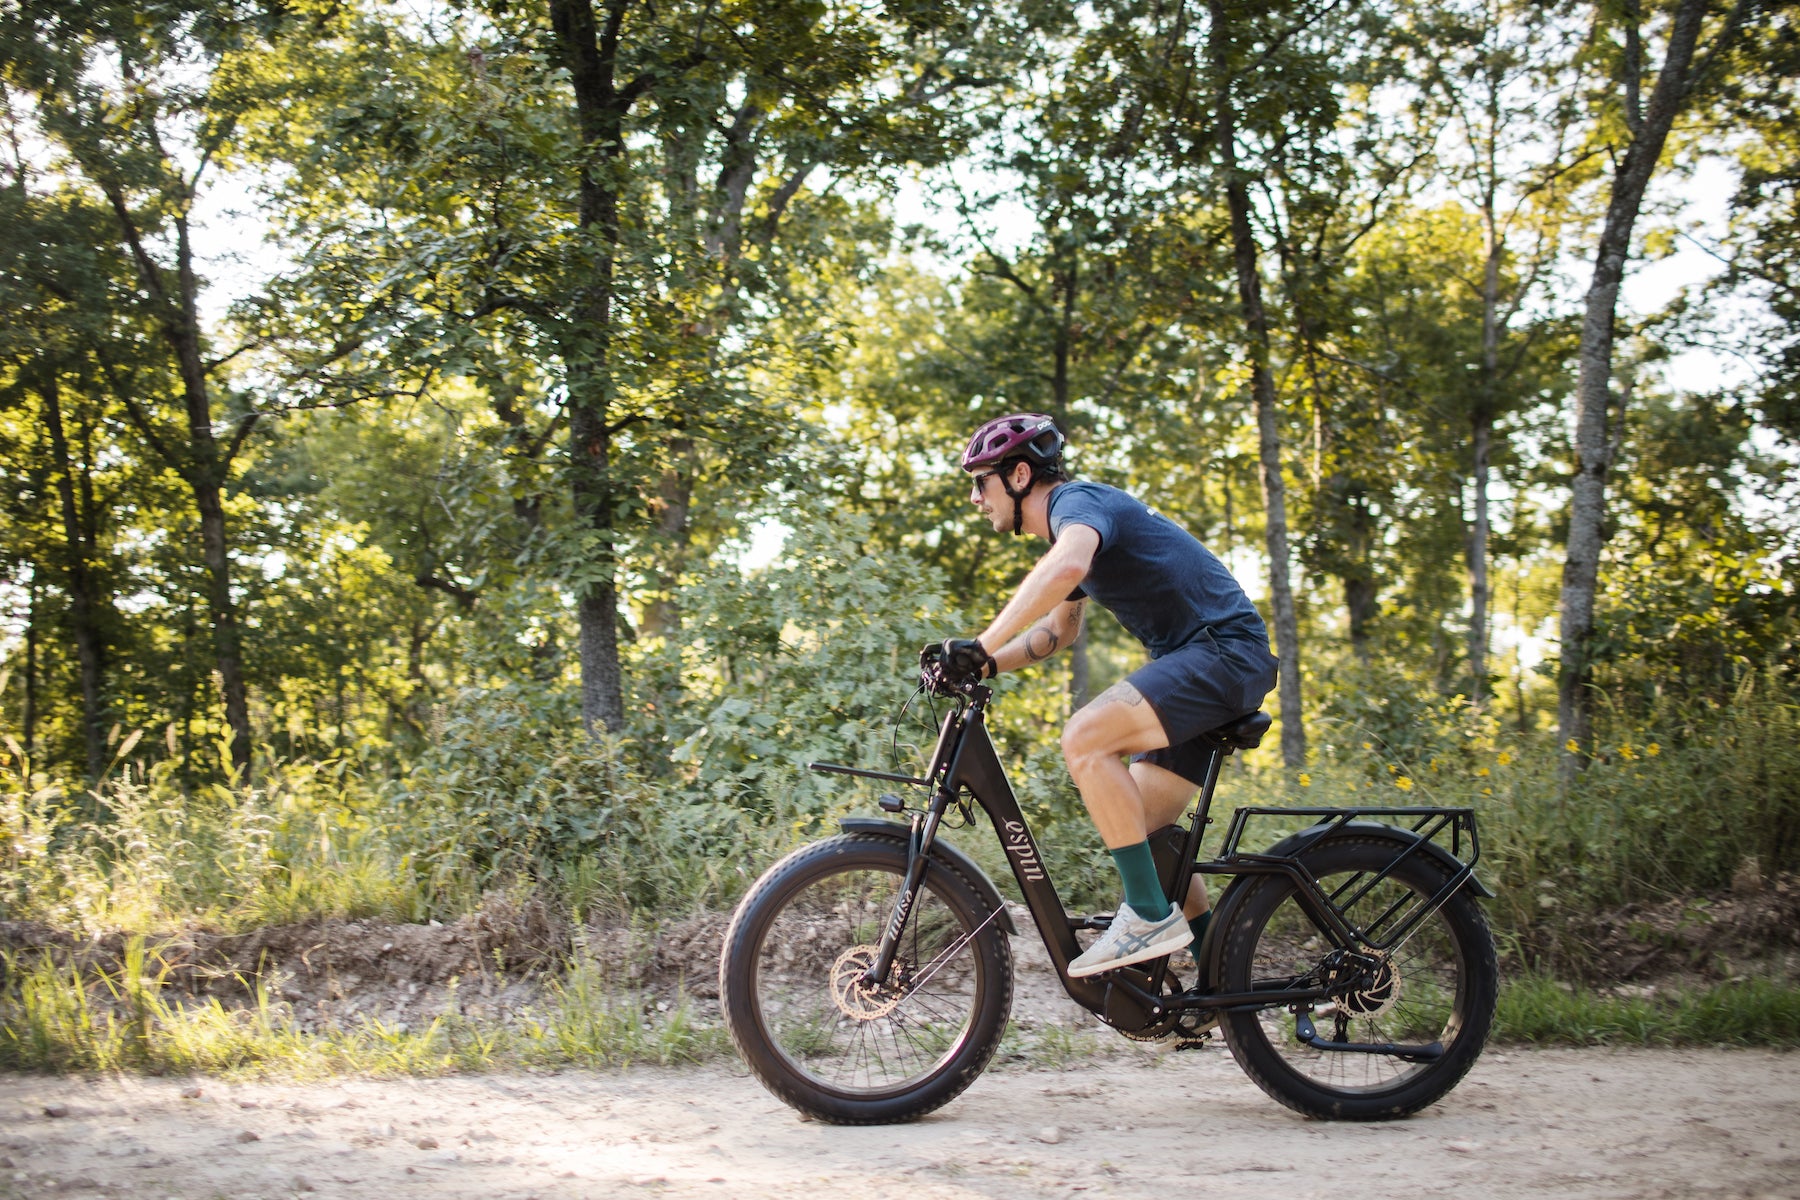 5 Reasons Why Fat Tires Are Great for Electric Bikes